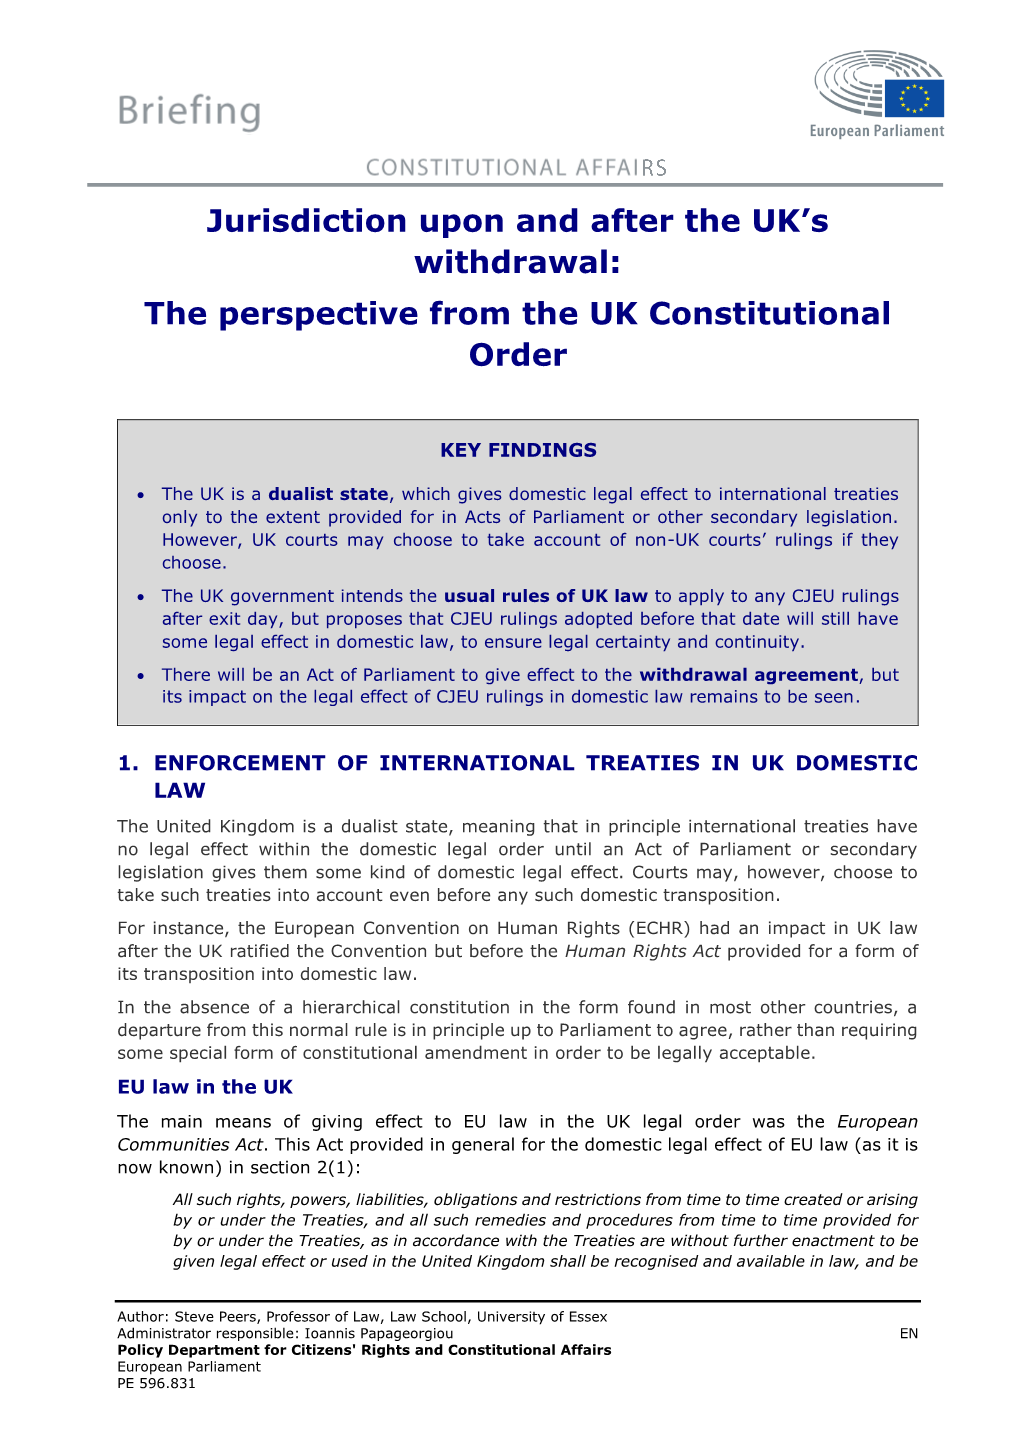 Jurisdiction Upon and After the UK's Withdrawal: the Perspective From